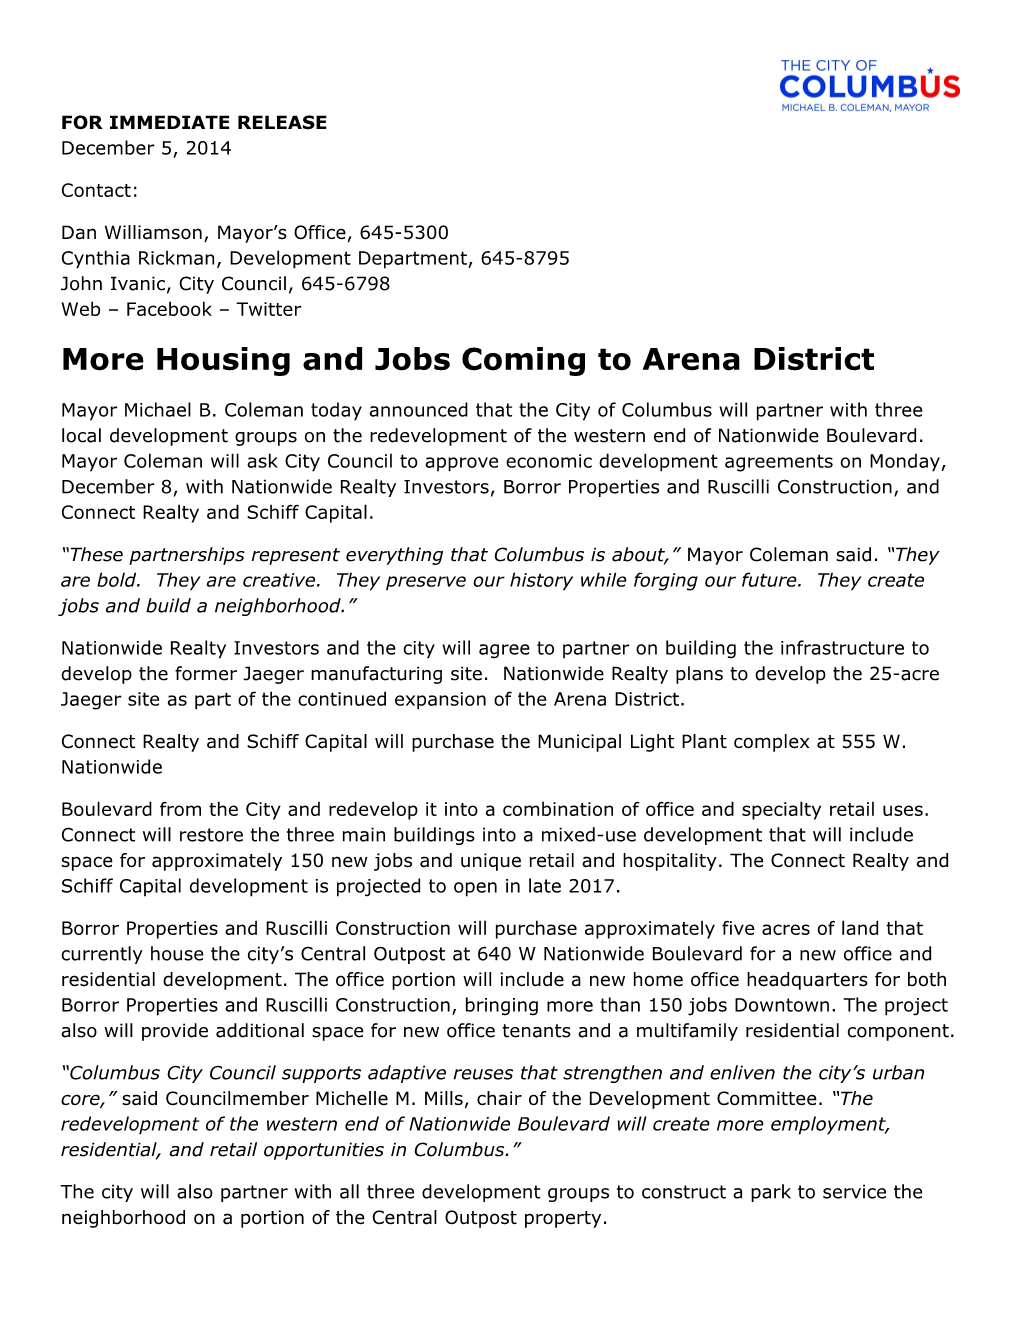 More Housing and Jobs Coming to Arena District